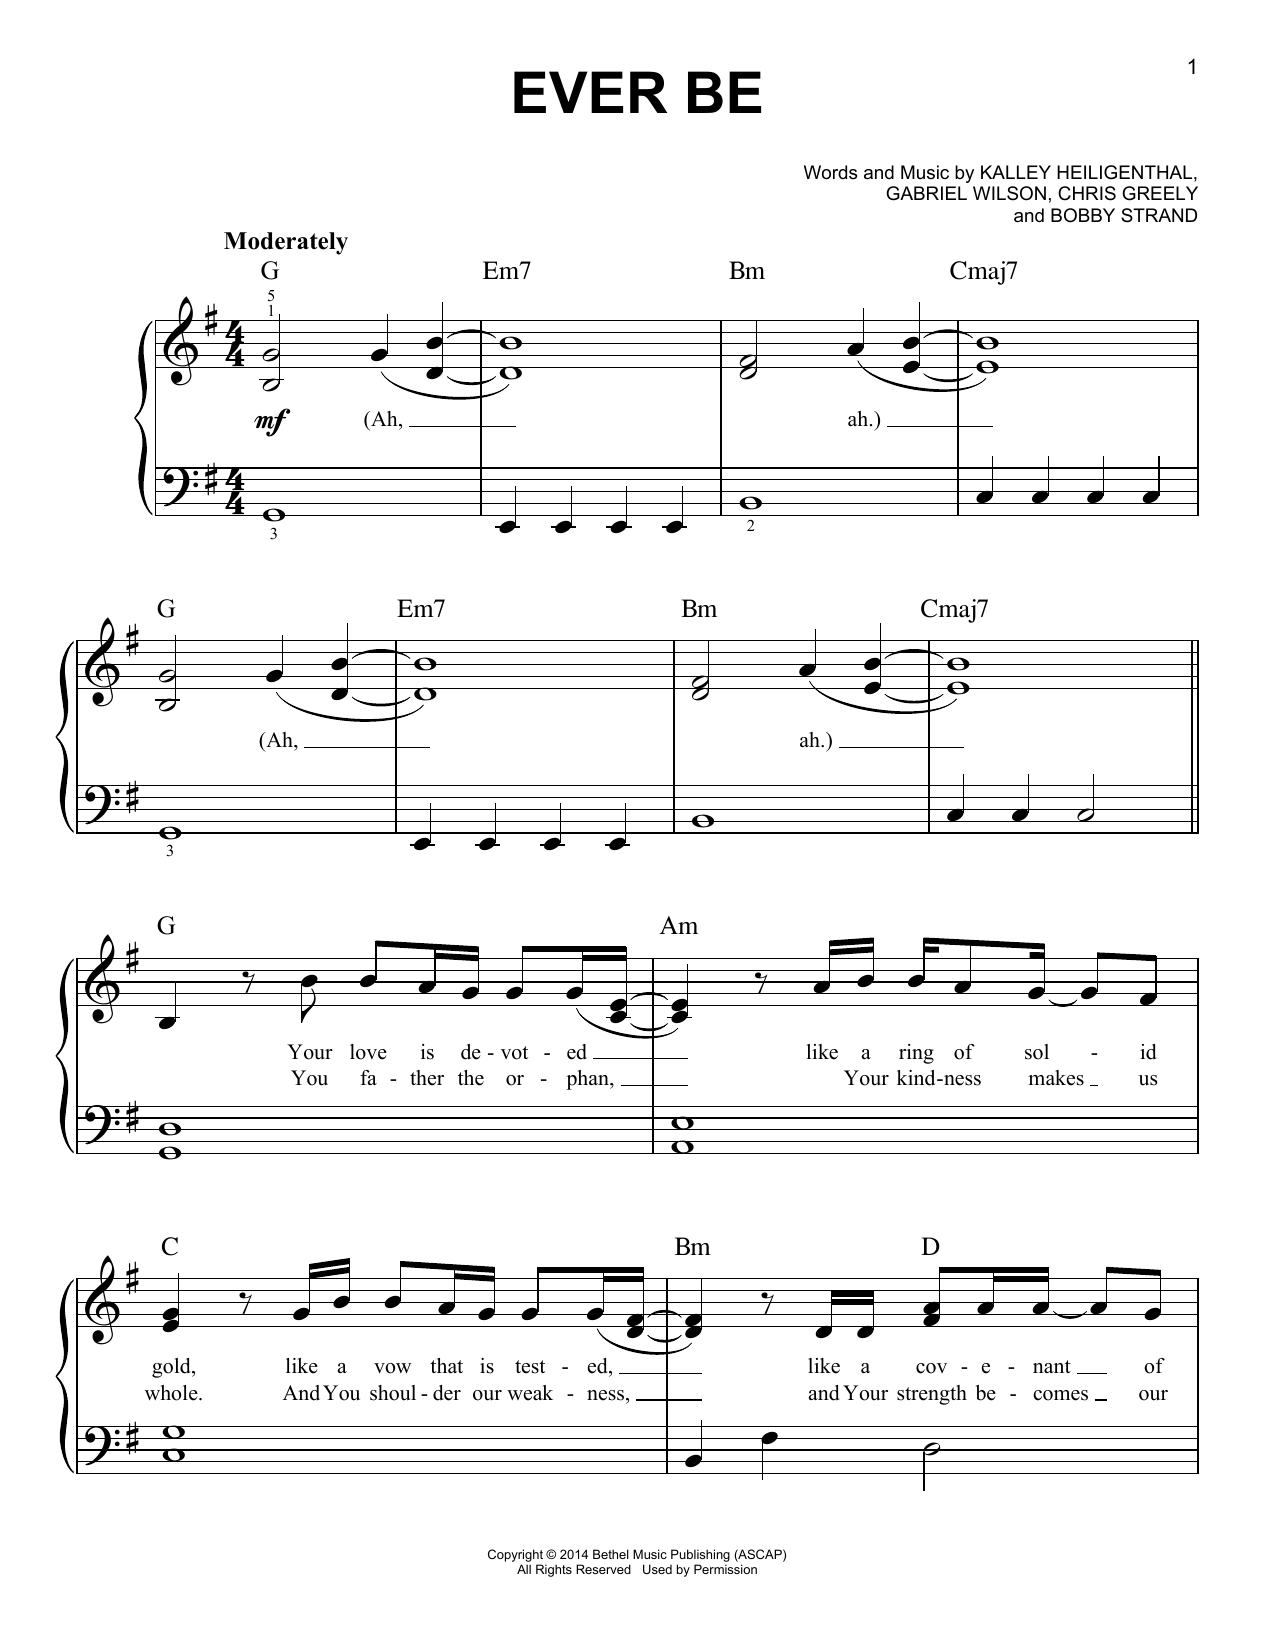 Download Bethel Music Ever Be Sheet Music